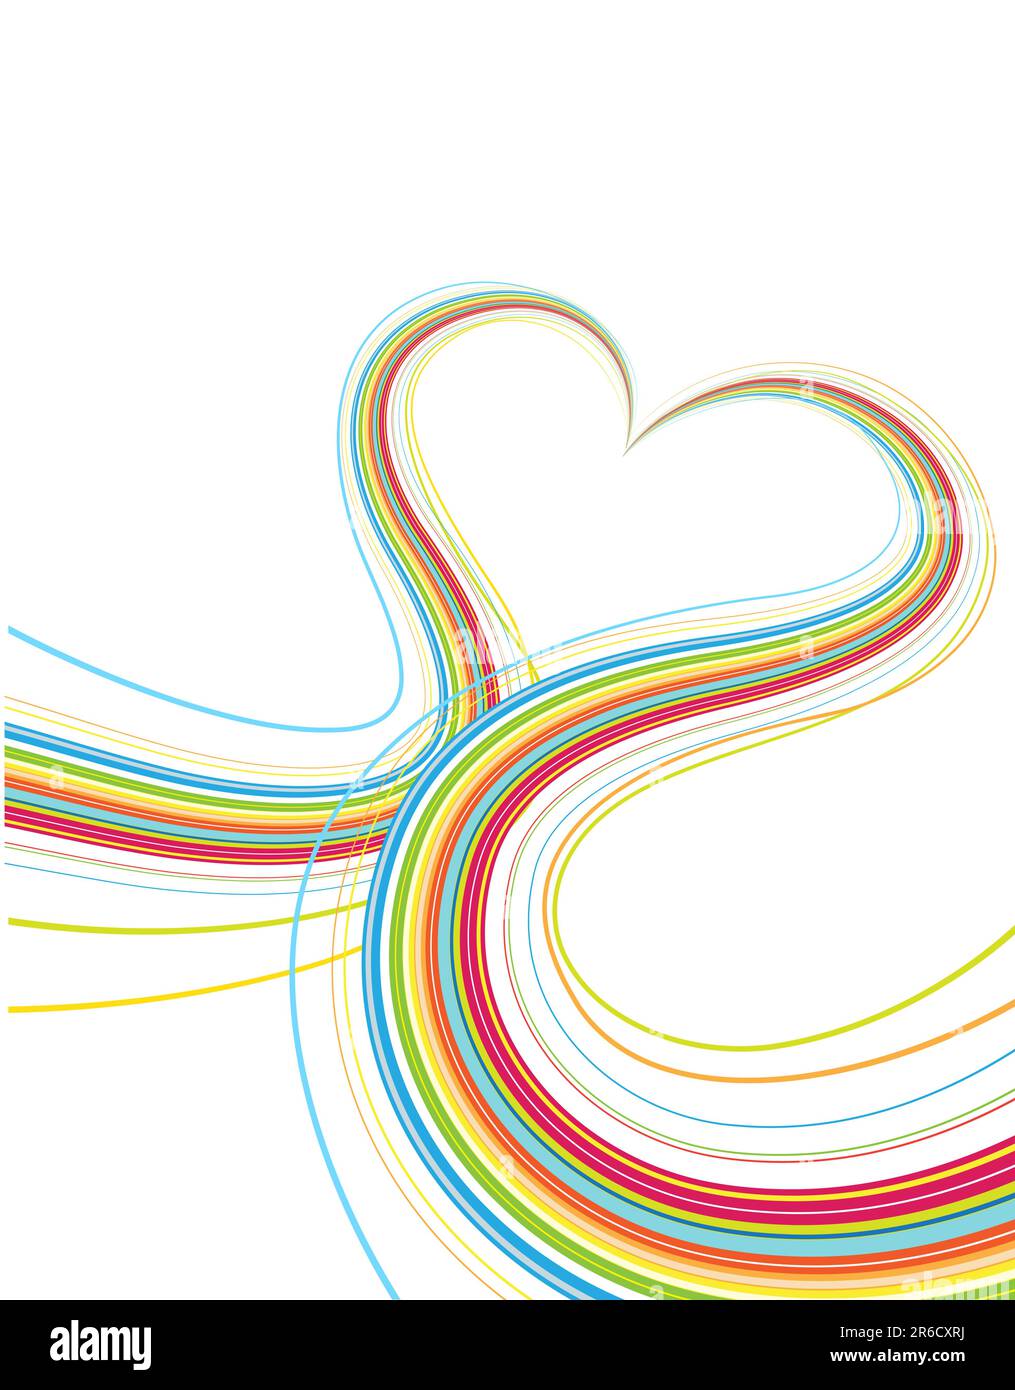 Vector illustrator of Colorful lines crossing each other on heart shape Stock Vector